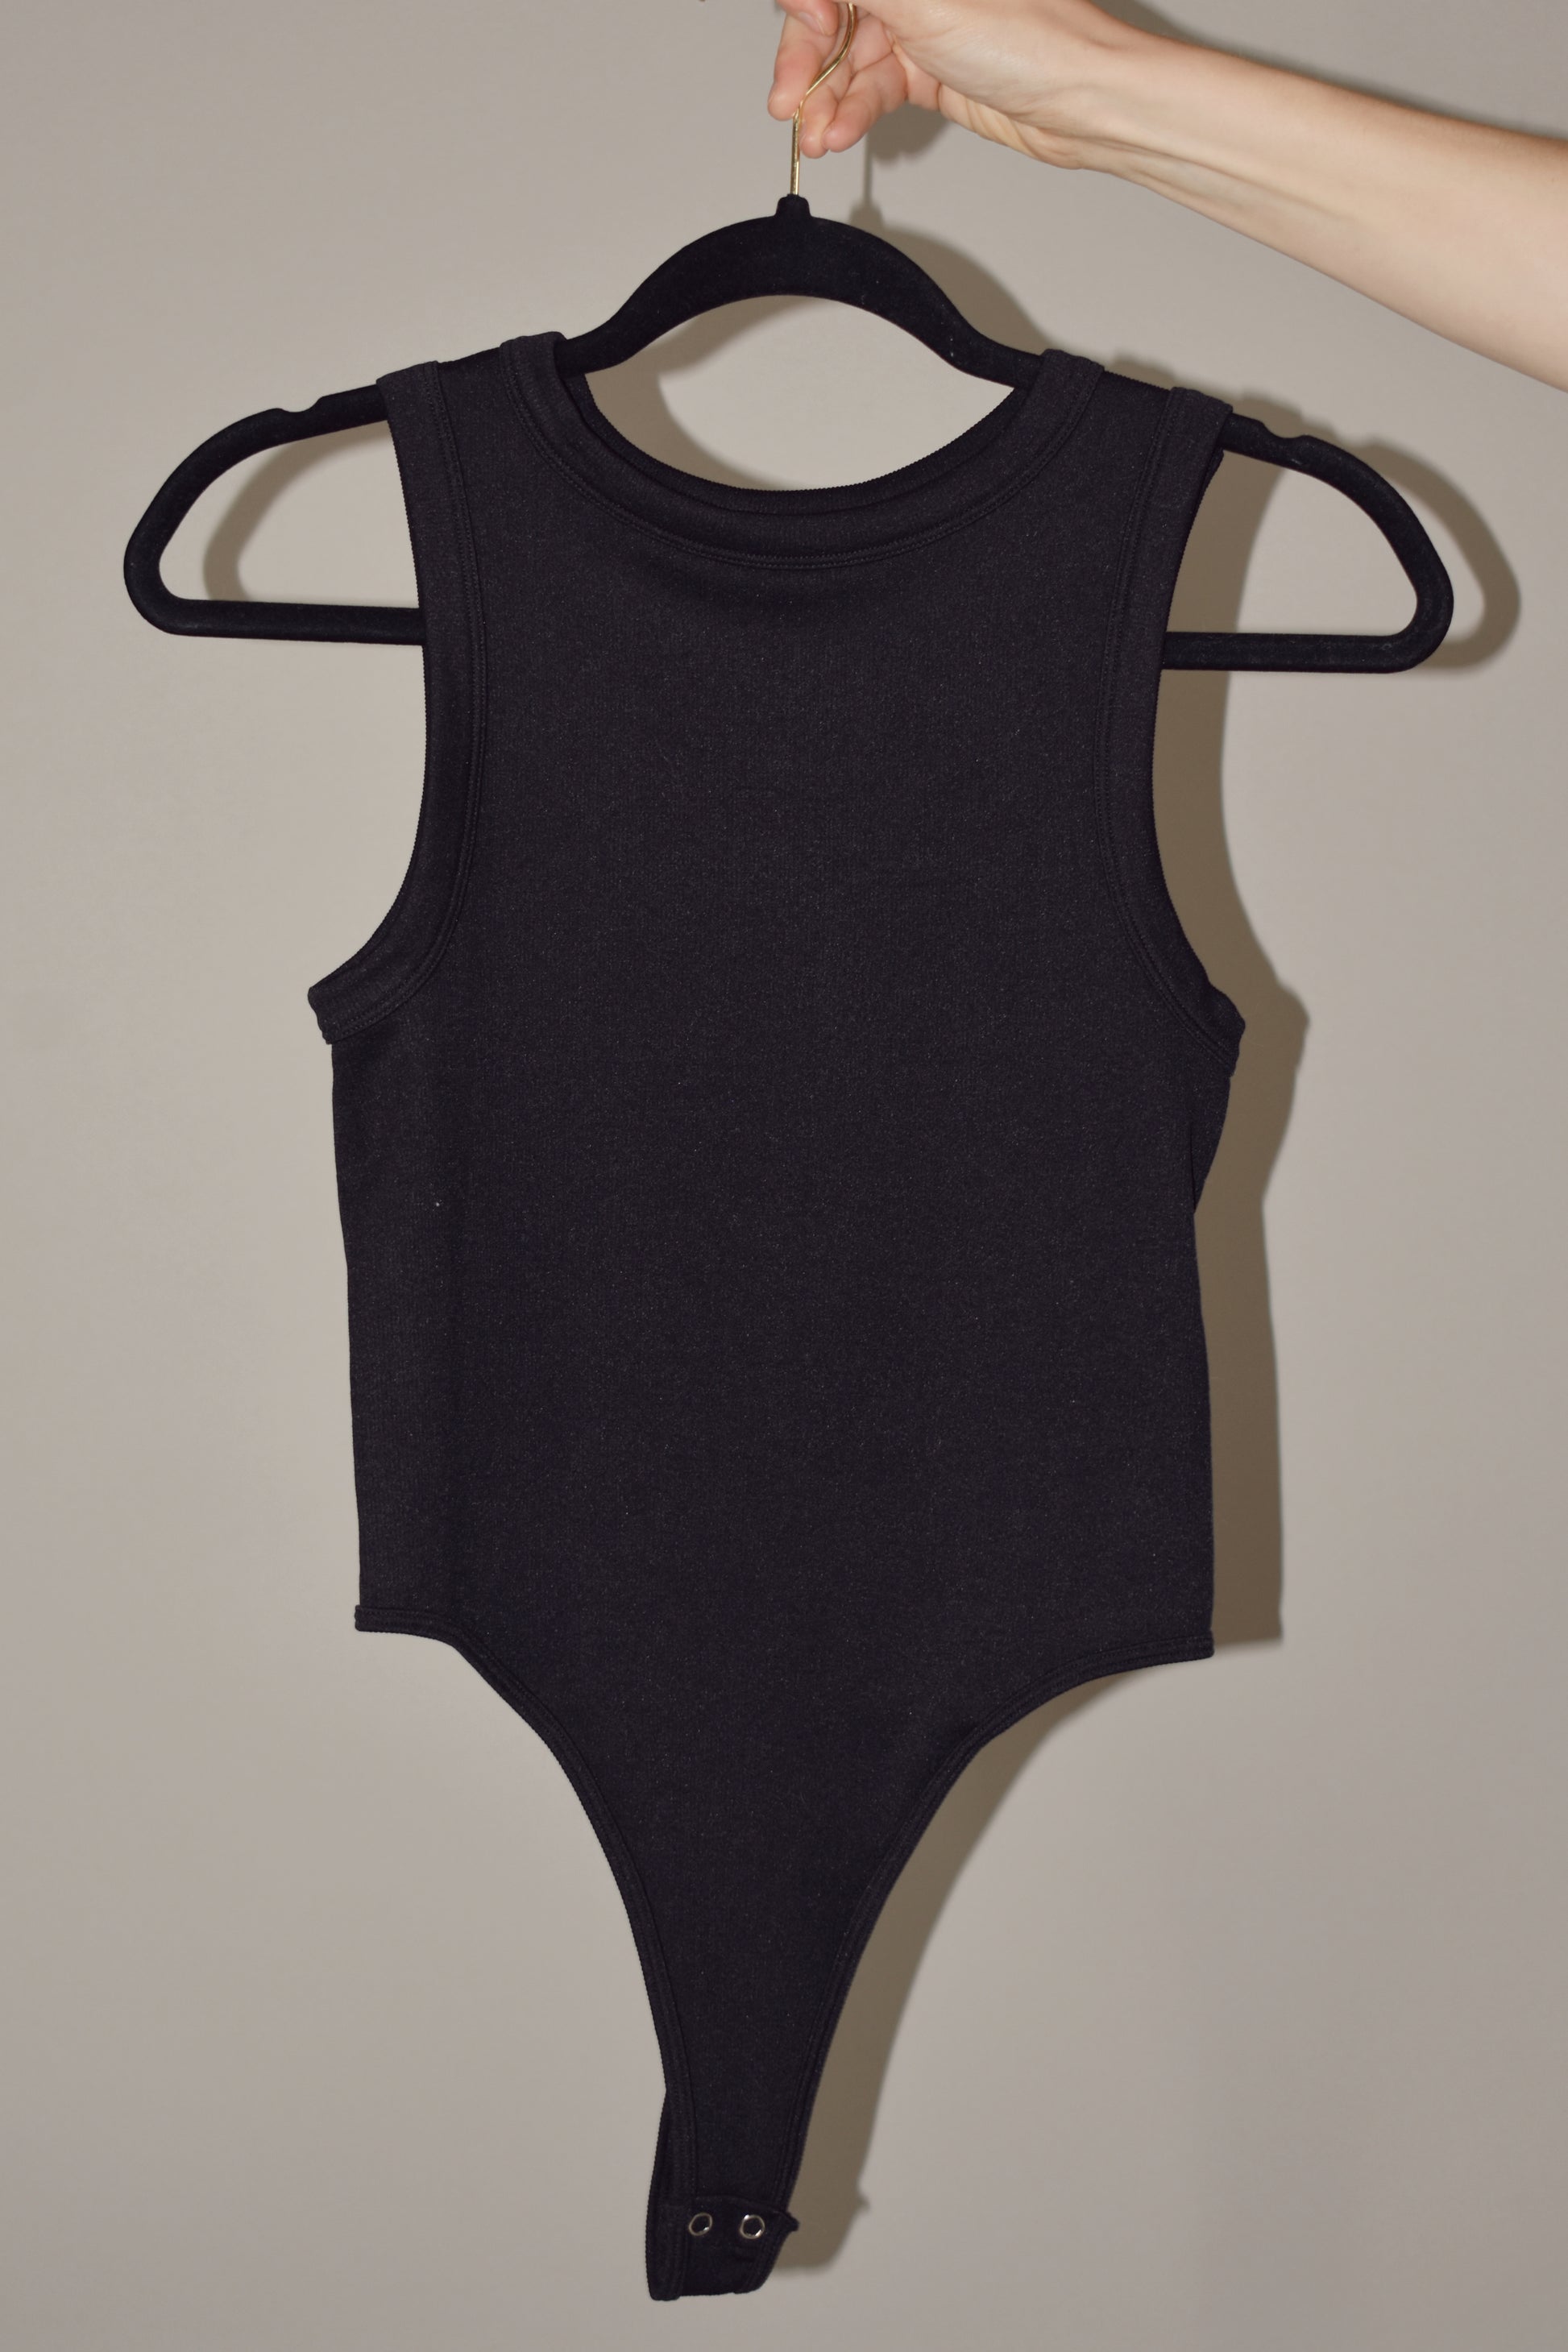 ribbed tank bodysuit, high crew neck, stretchy, two snap enclosure.